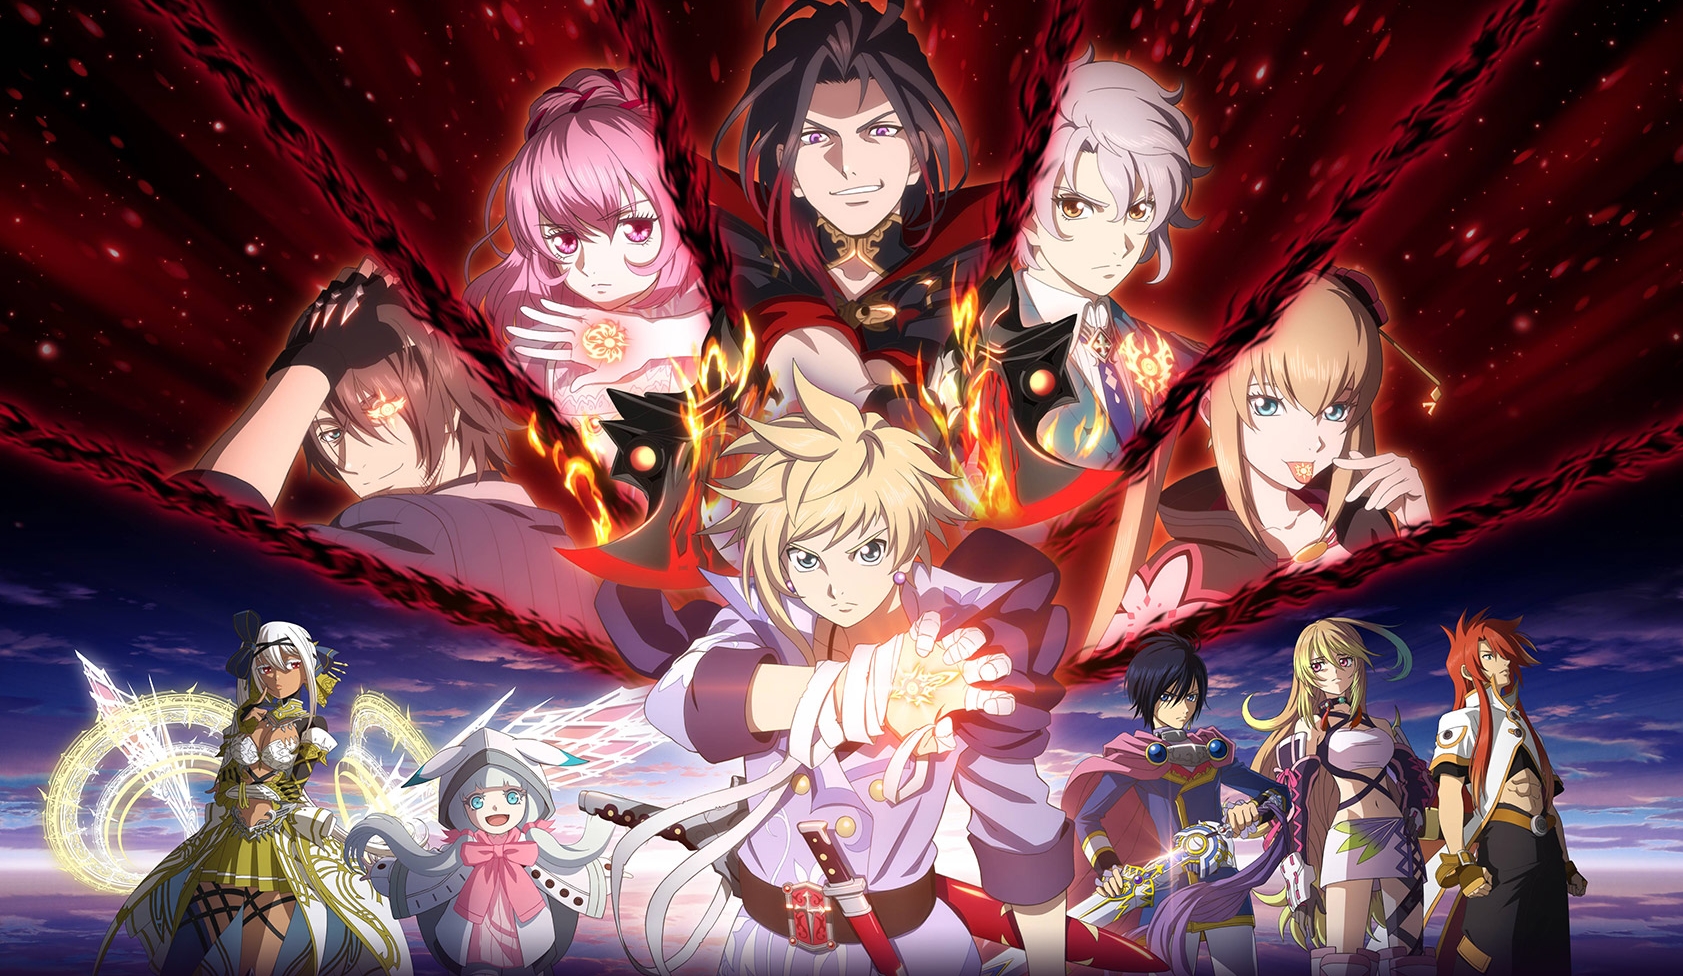 Tales of Crestoria Release Date Pushed Back To Resolve Beta Test Issues